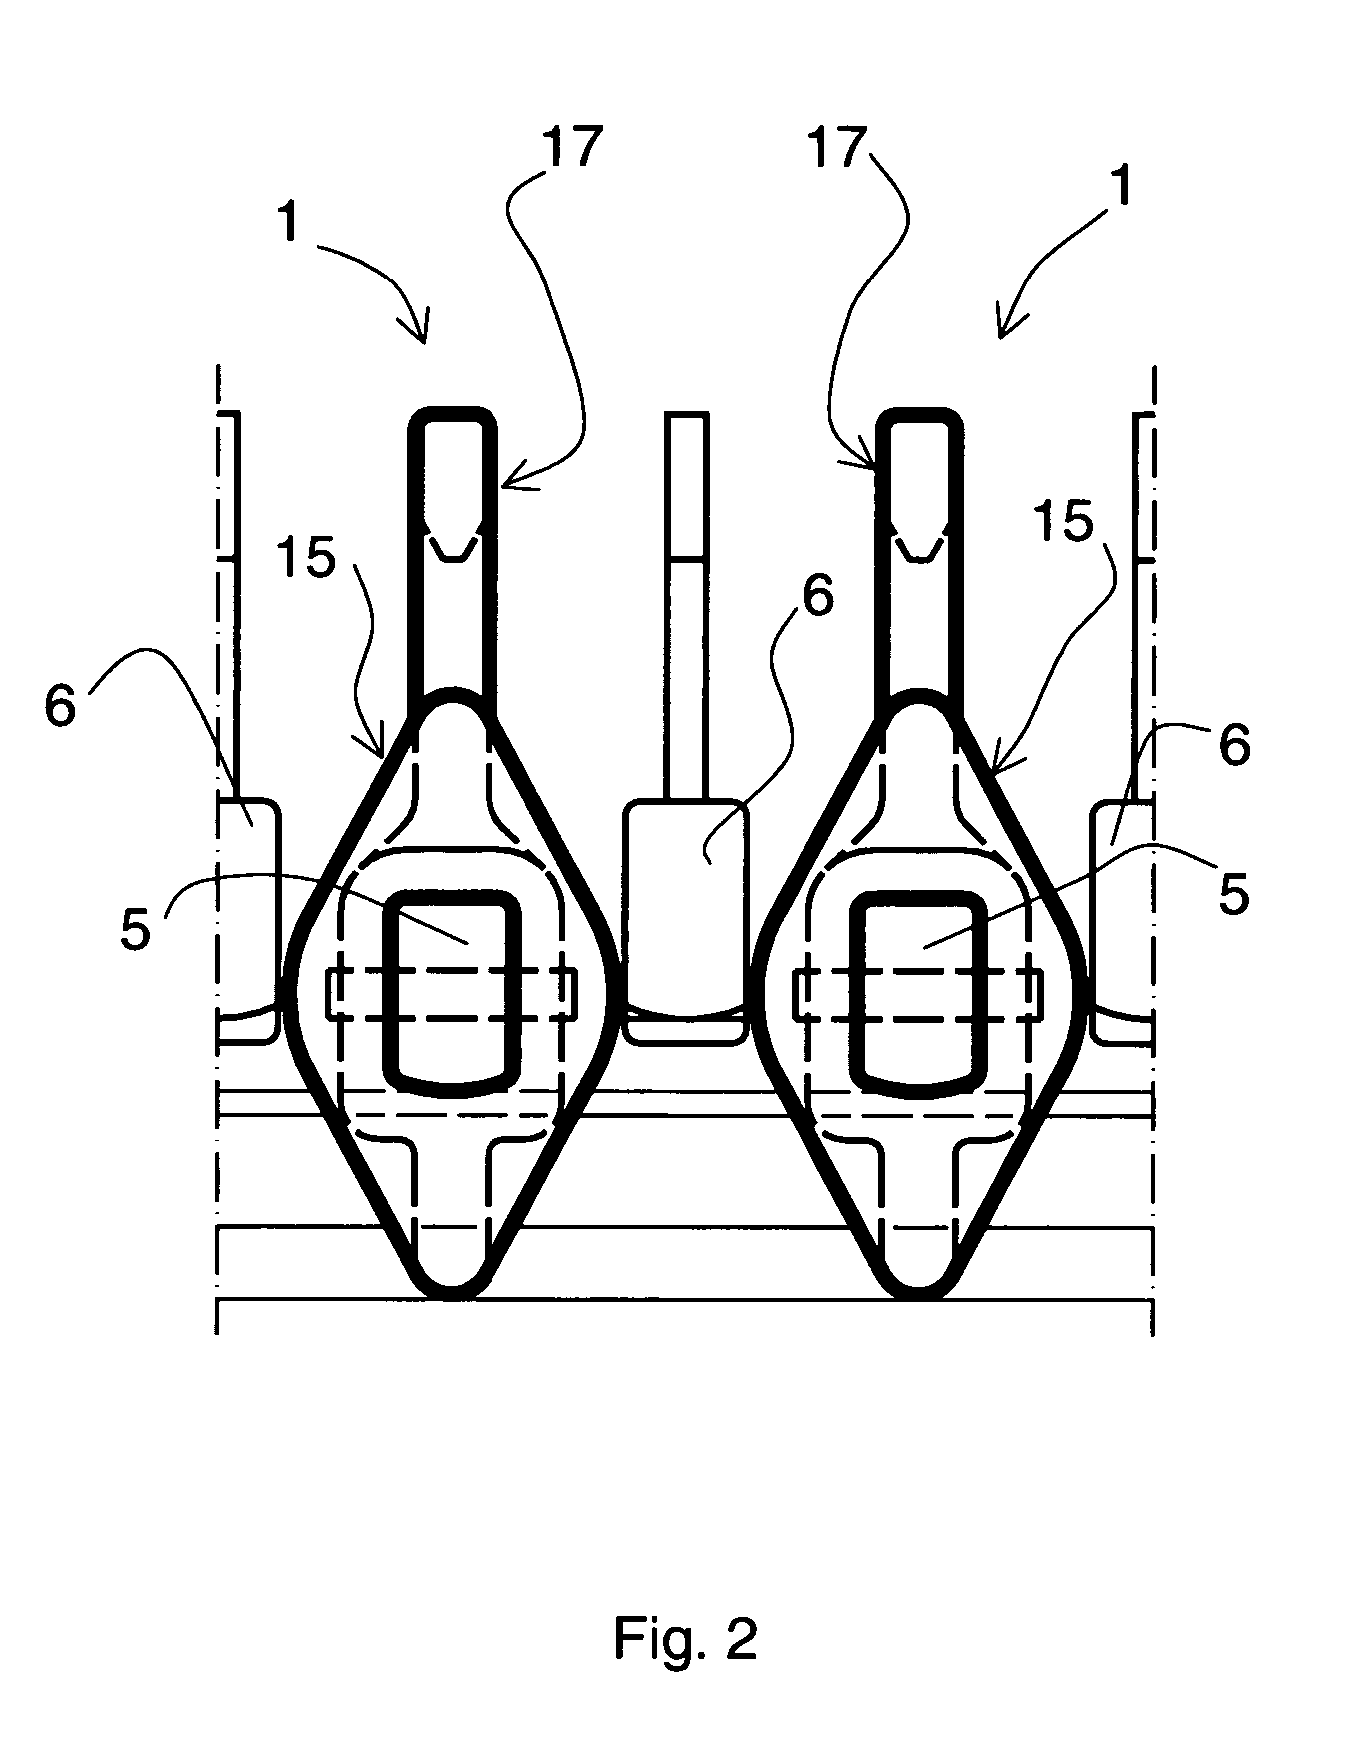 Transfer and insulation device for electrolysis